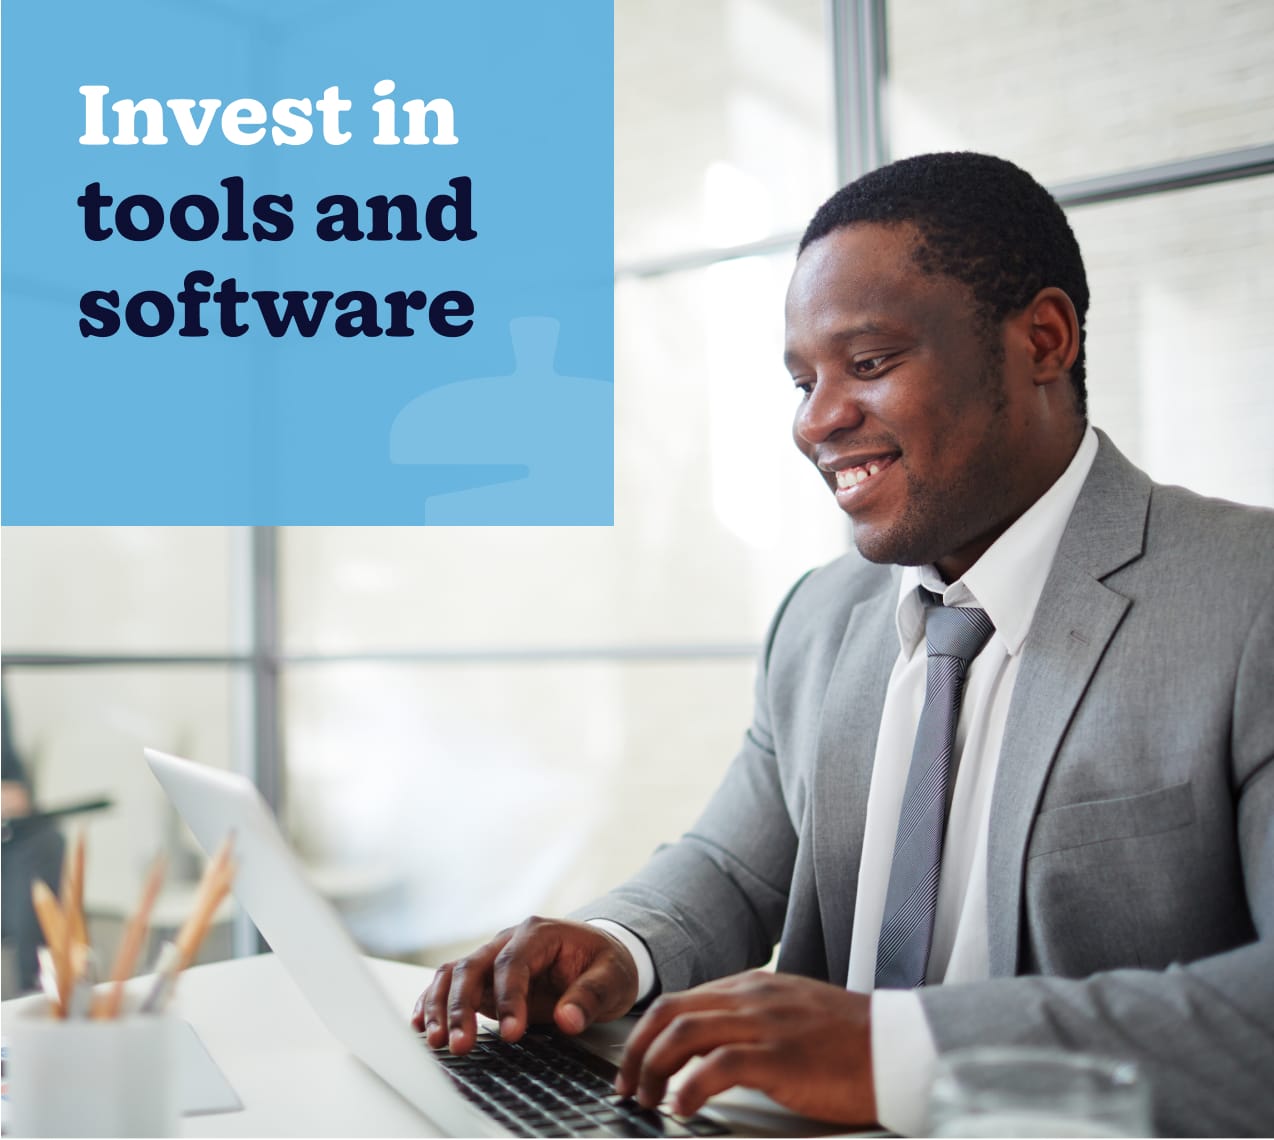 Invest in tools and software